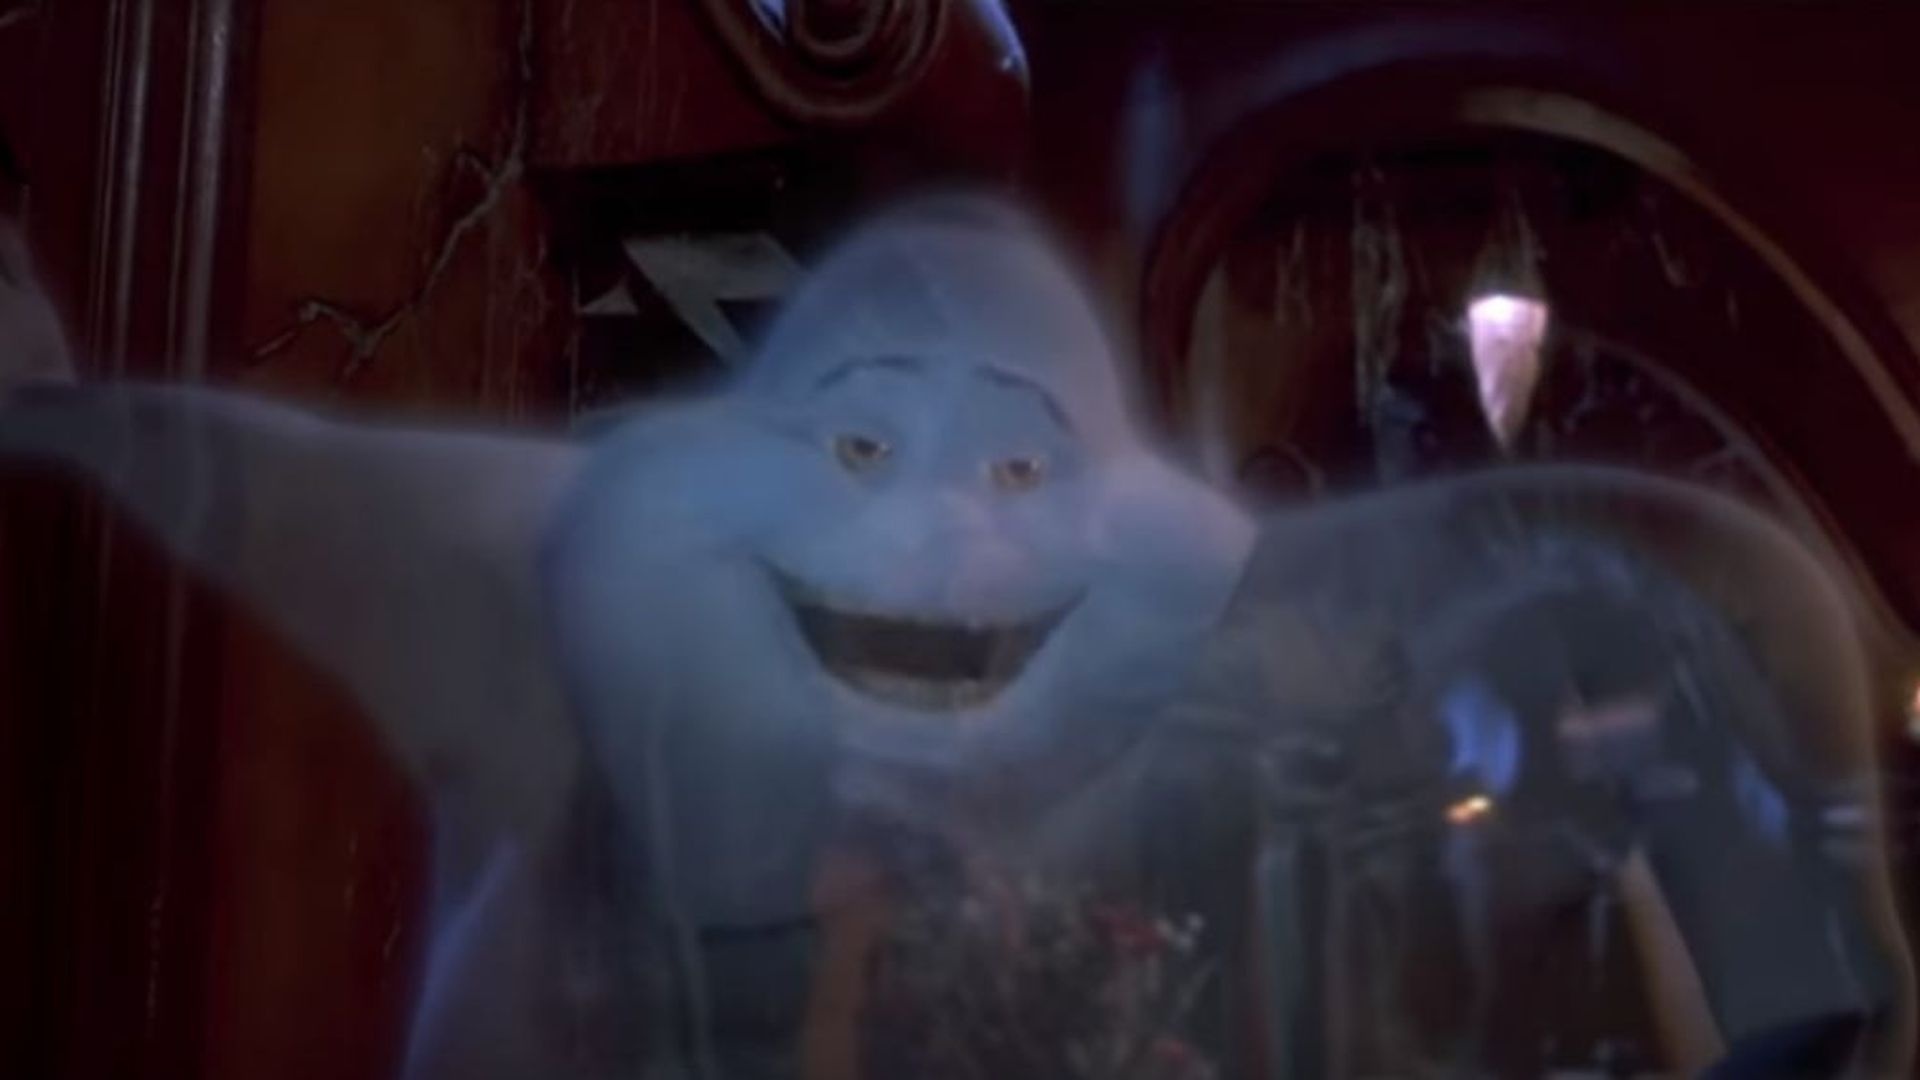 Casper (Movie): The story of a very sweet and sad ghost boy. 1920x1080 Full HD Wallpaper.